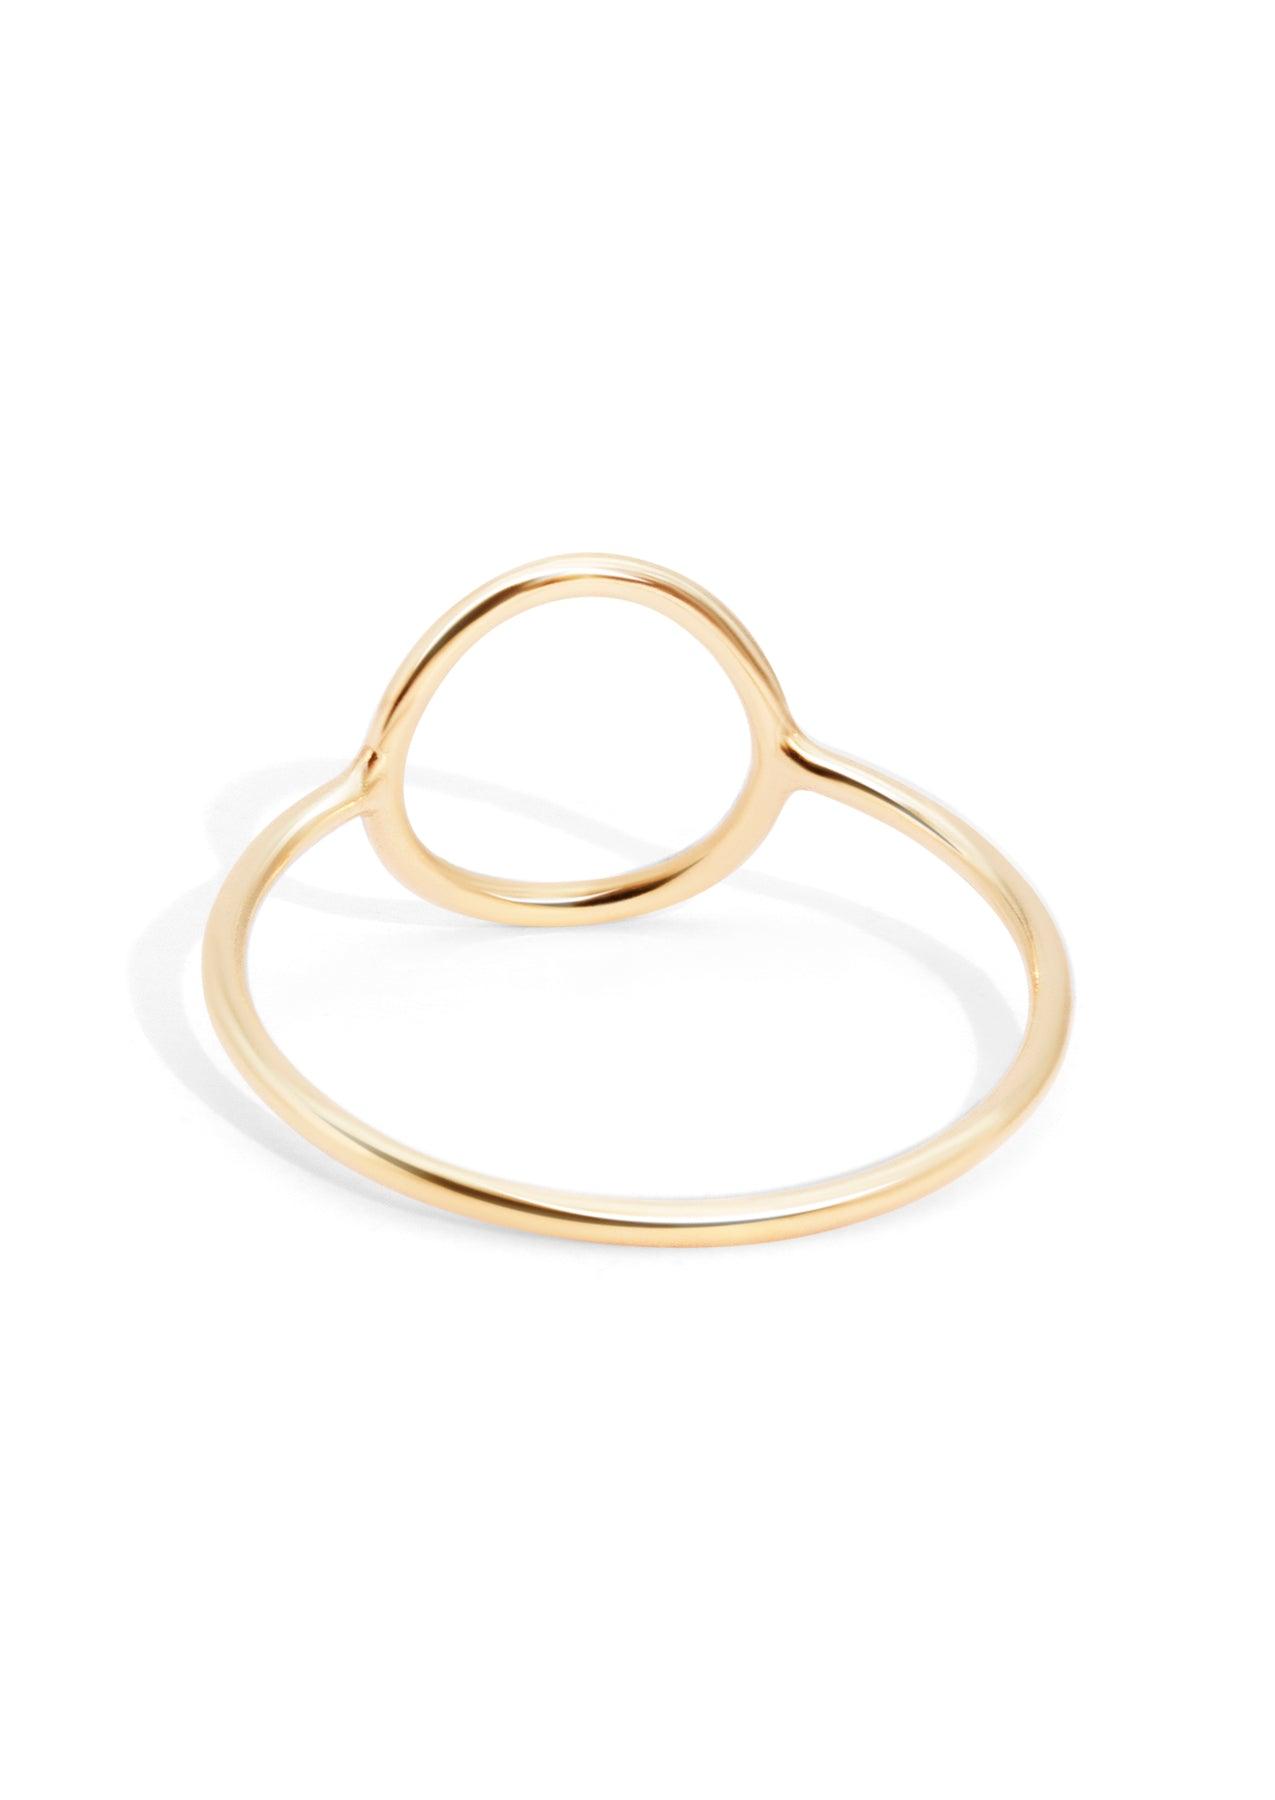 The Hoop 14ct Gold Filled Ring - Molten Store